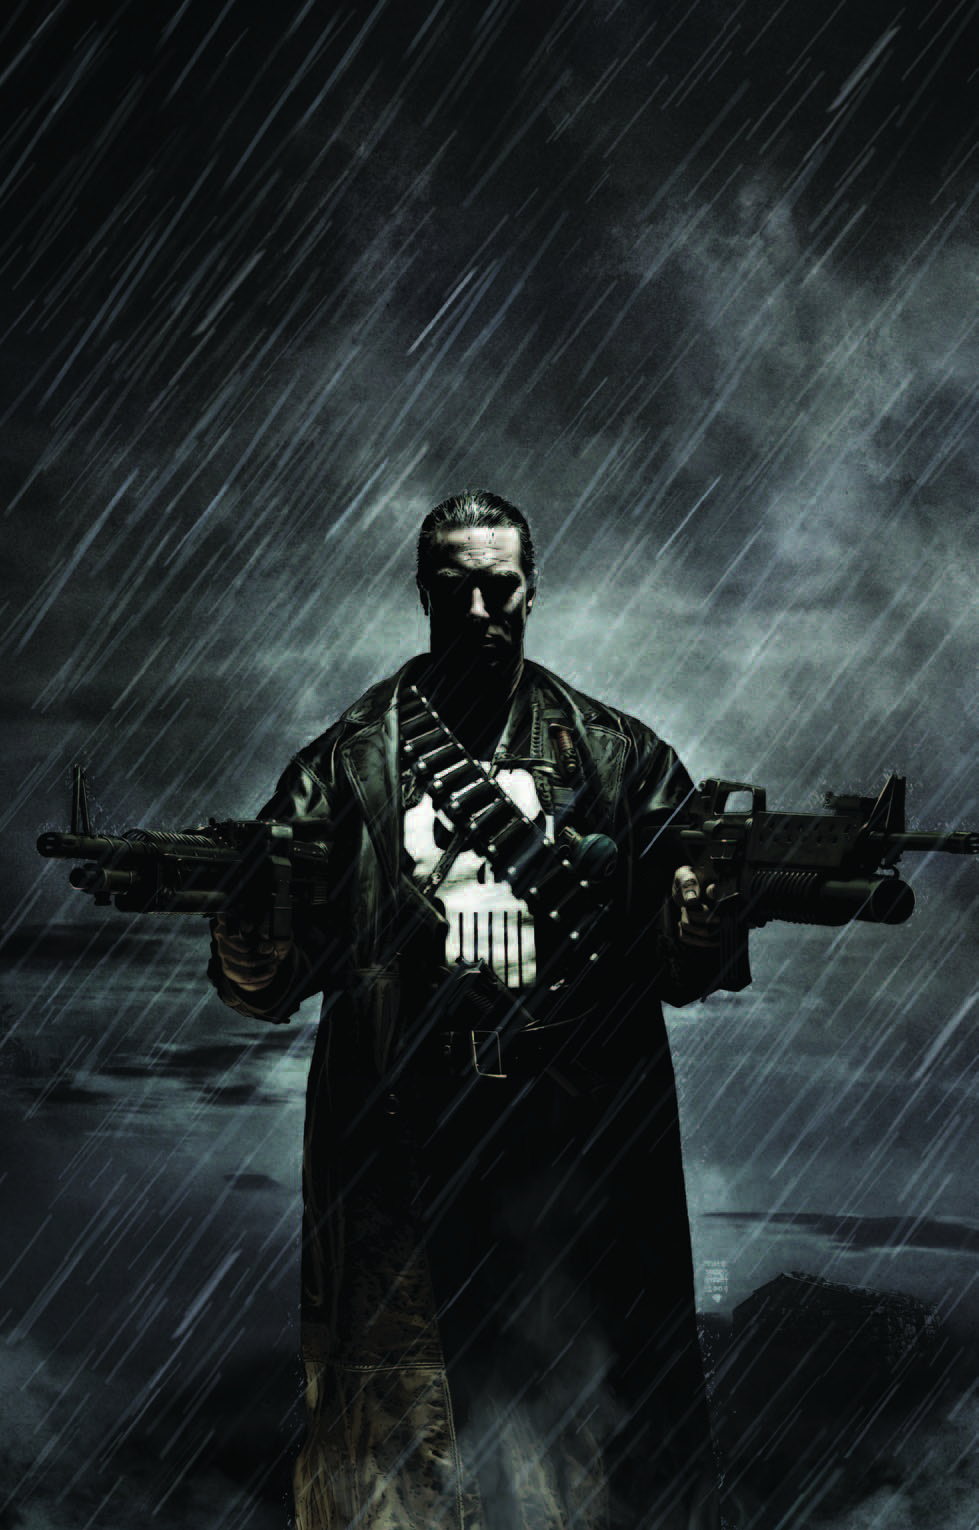 Punisher Max Wallpapers